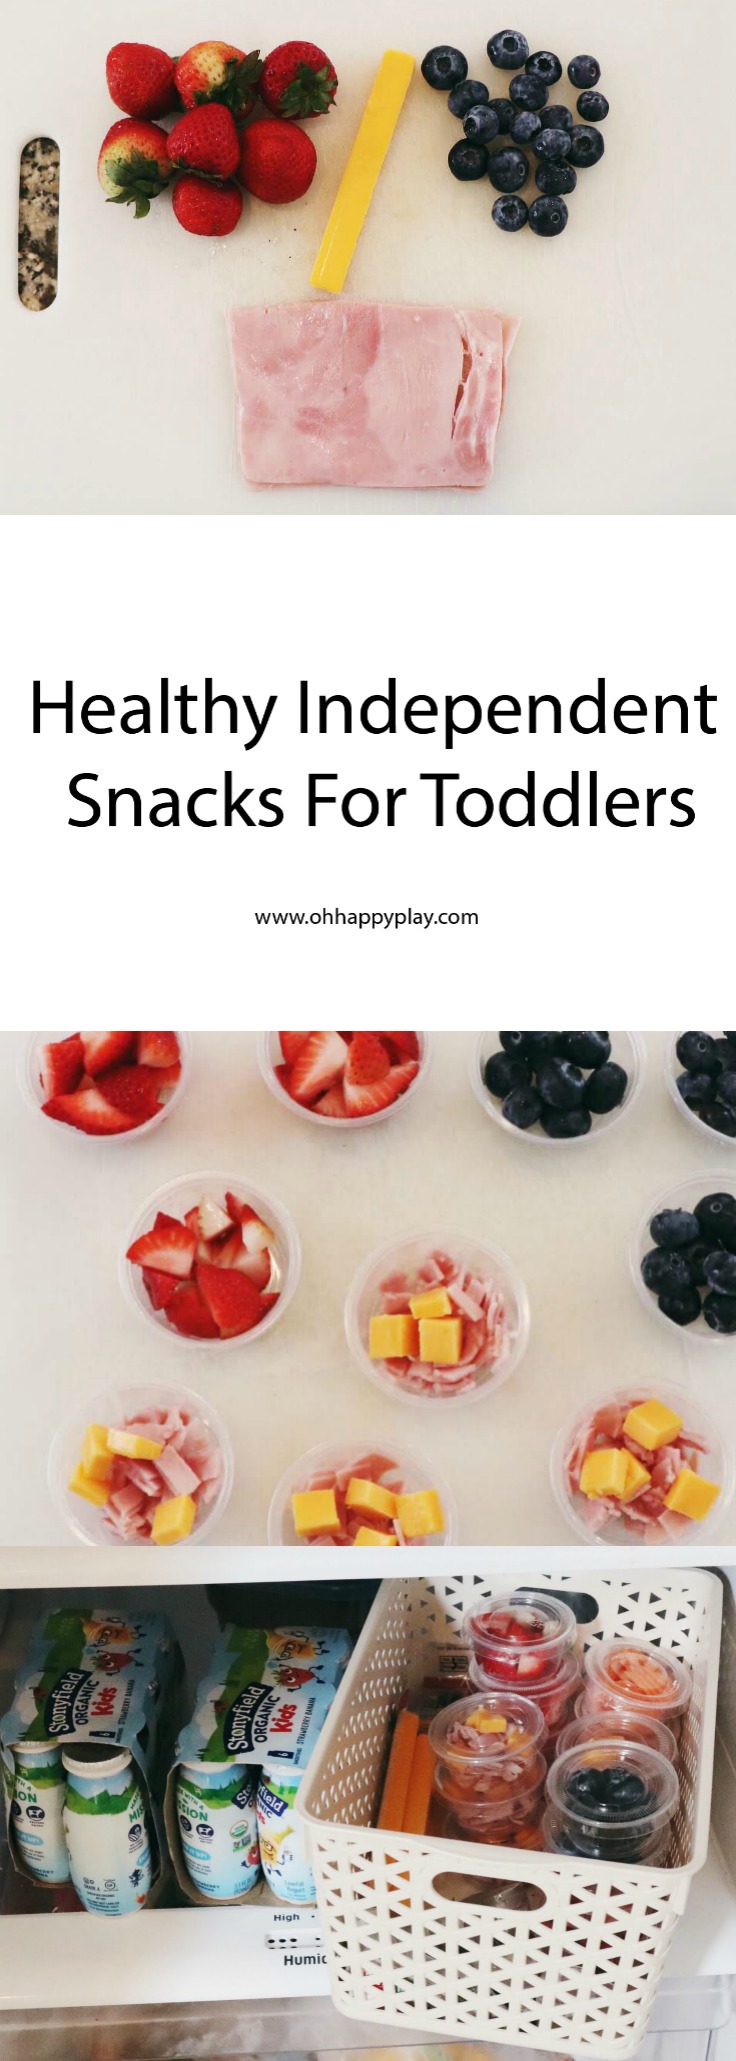 Healthy Independent Snacks For Toddlers from Oh Happy Play, Florida Motherhood blogger! Check it out now!